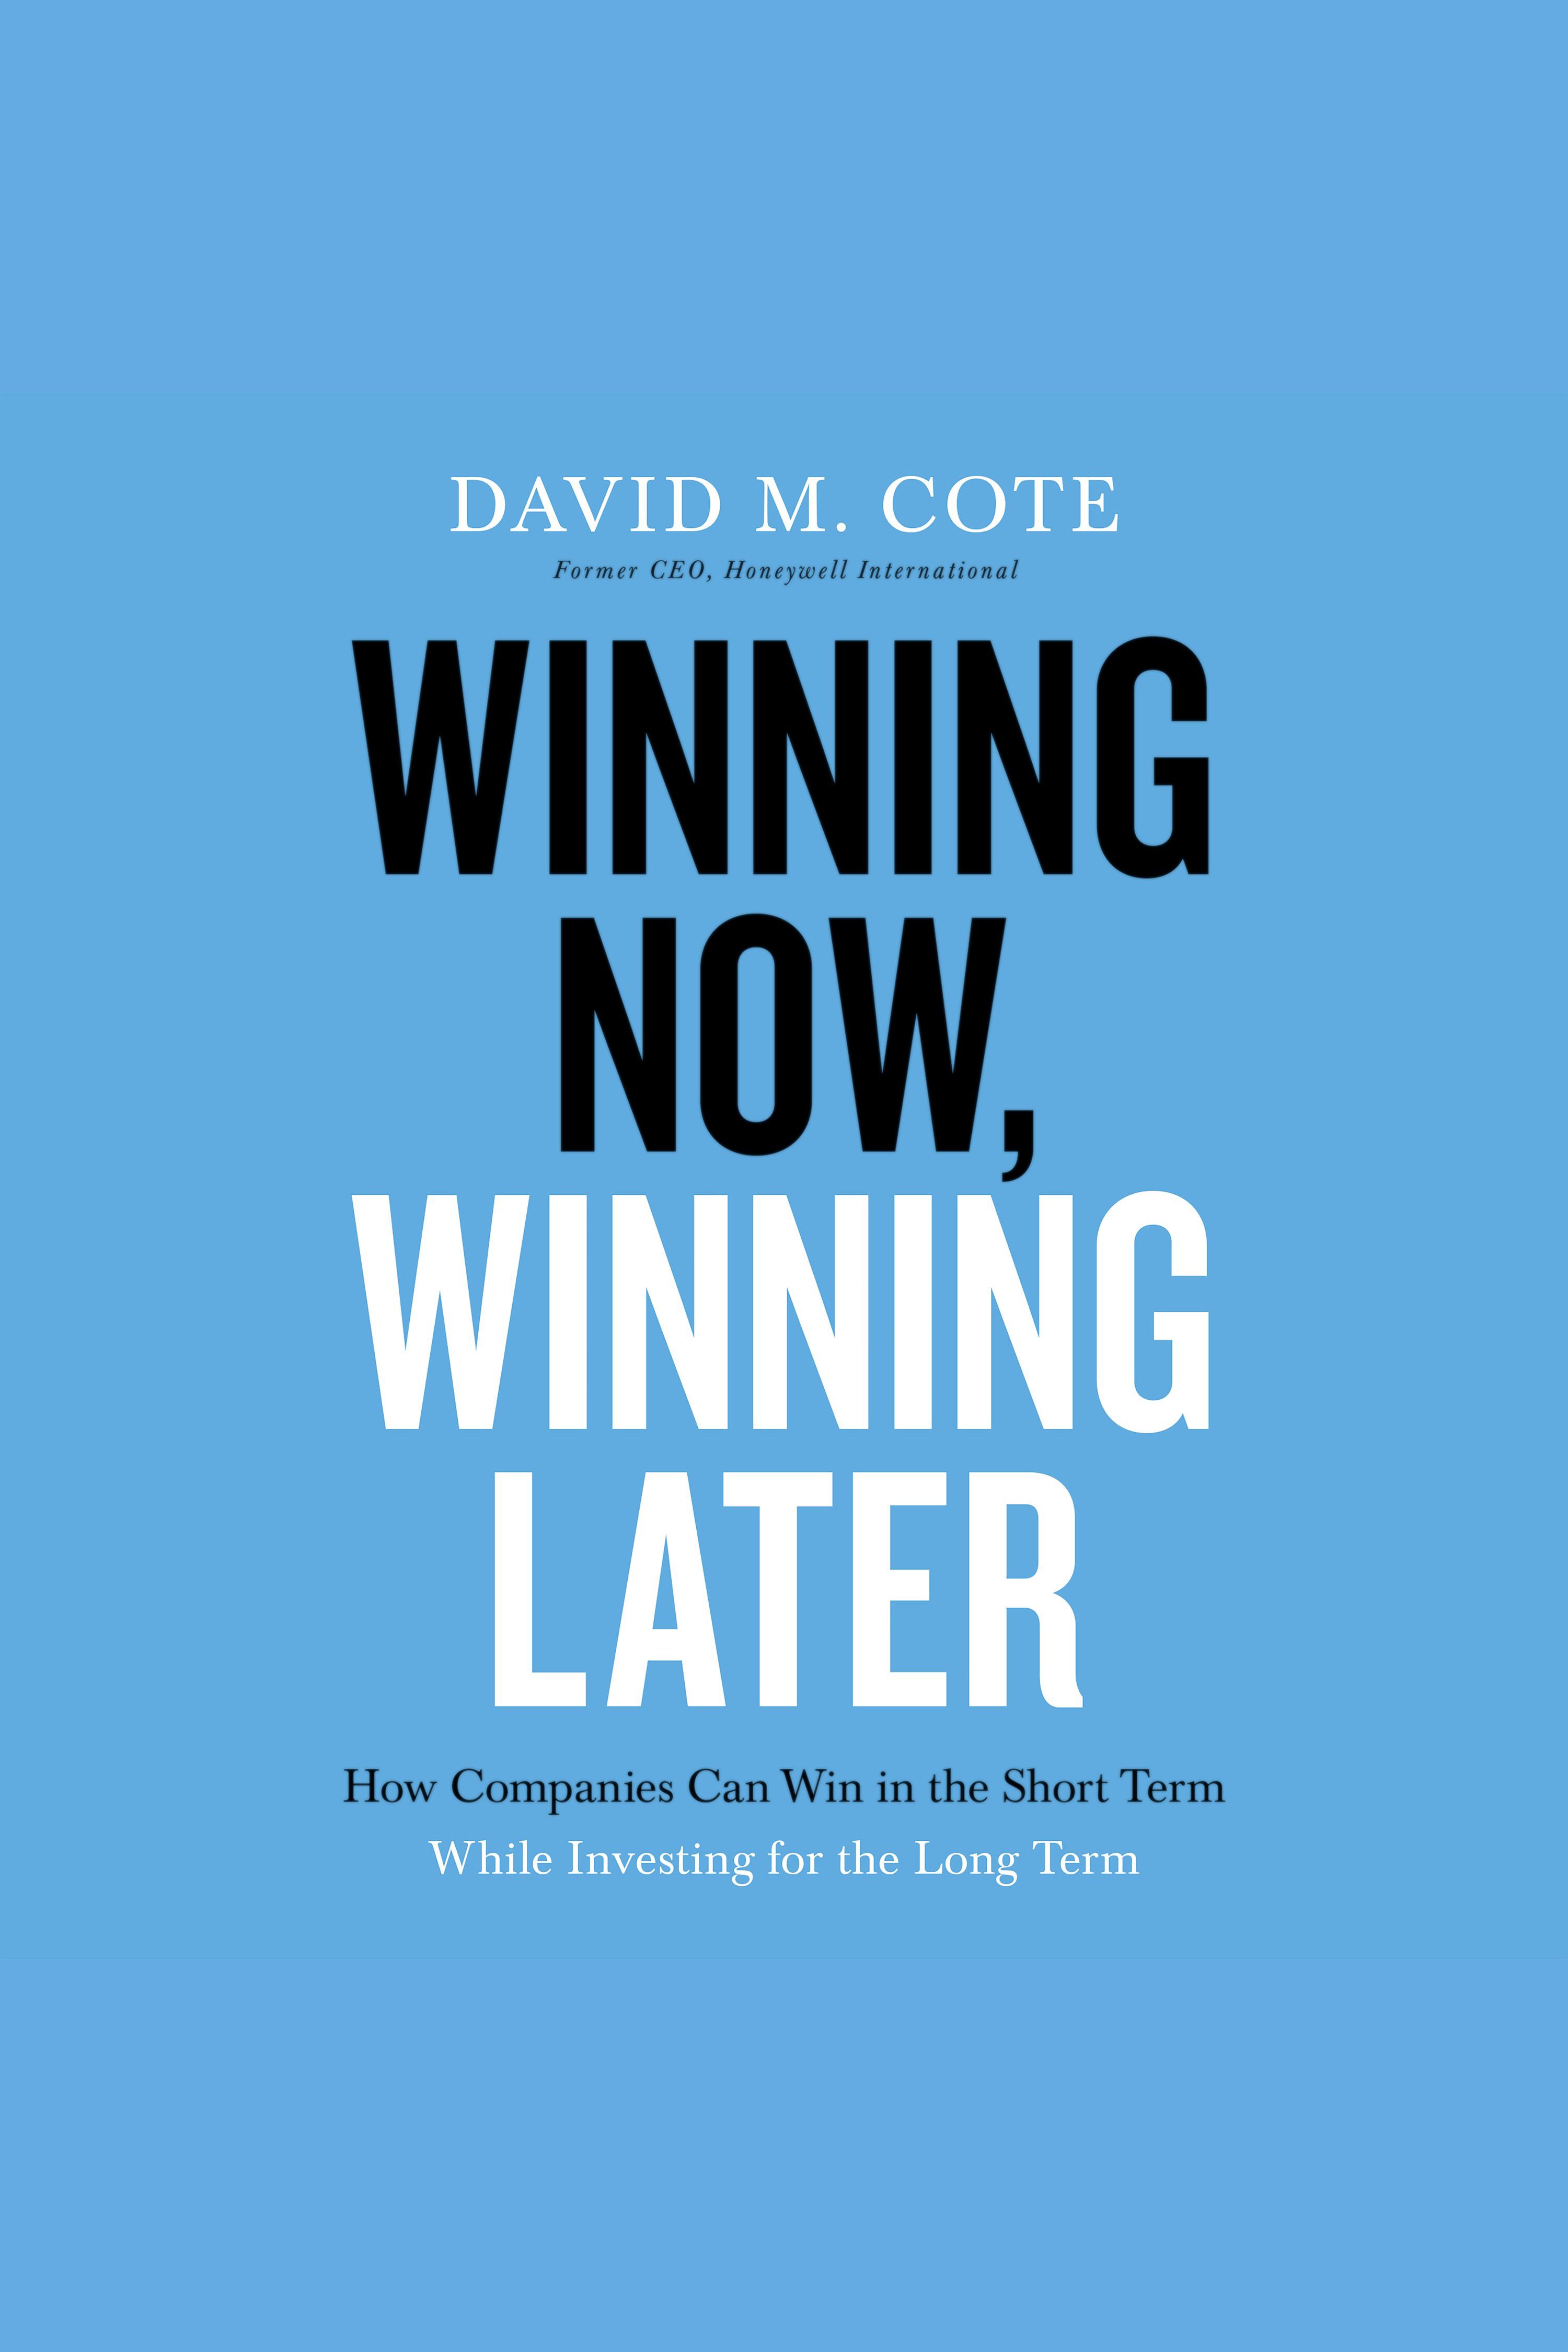 Winning Now, Winning Later How Companies Can Succeed in the Short Term While Investing for the Long Term cover image